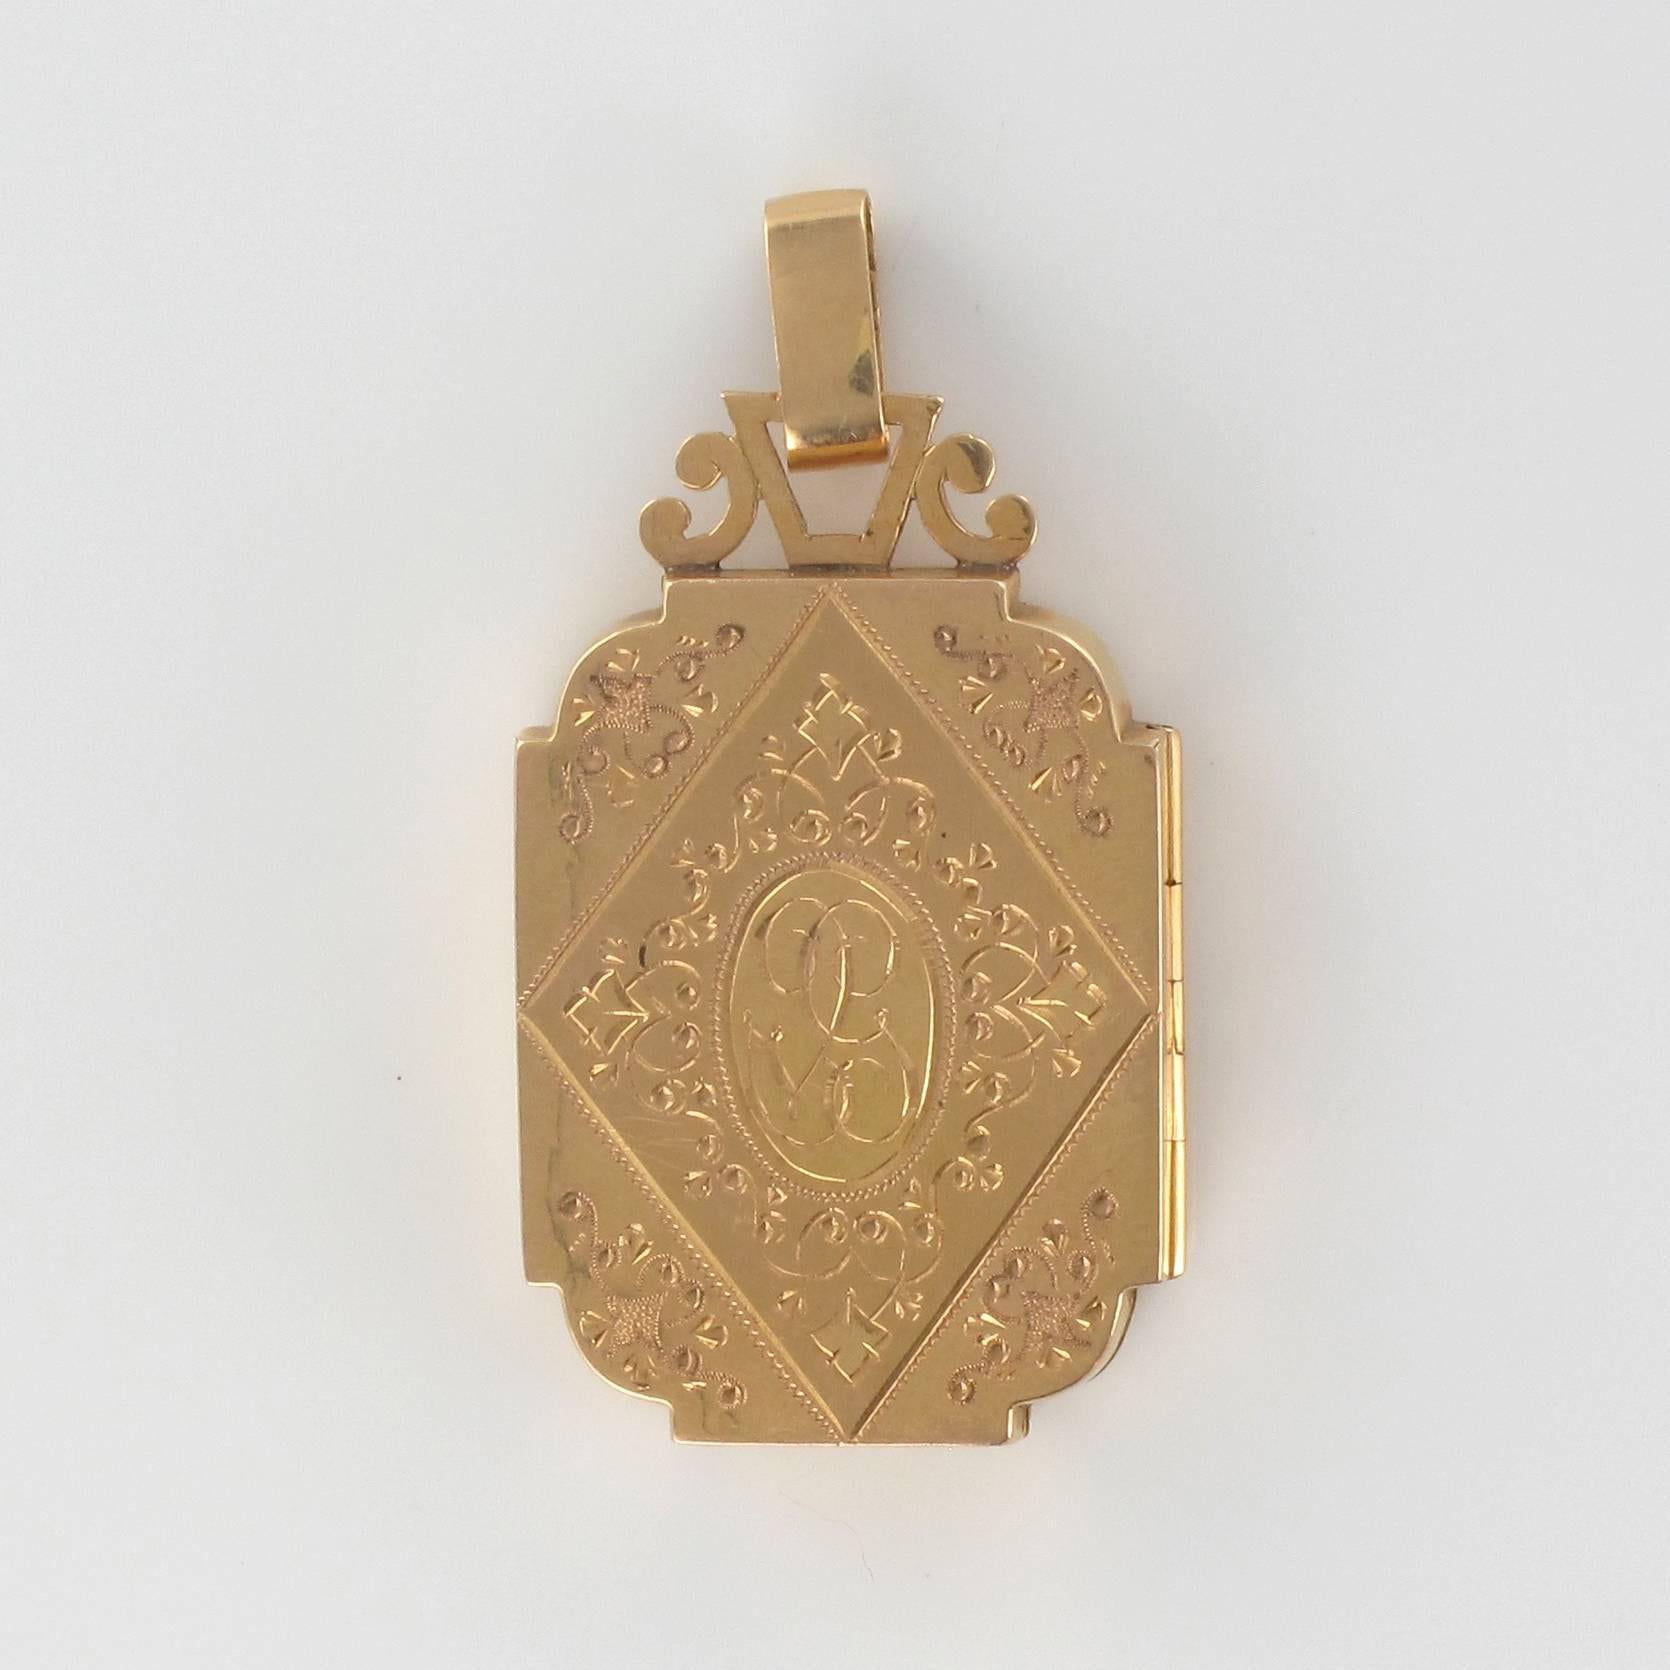 Medallion in 18 carat yellow gold, eagle head hallmark. 

This golden medallion is engraved with a diamond shaped motif with arabesques on the front and a cartouche style design at the back. It opens with a hinge at the side to reveal a crystal